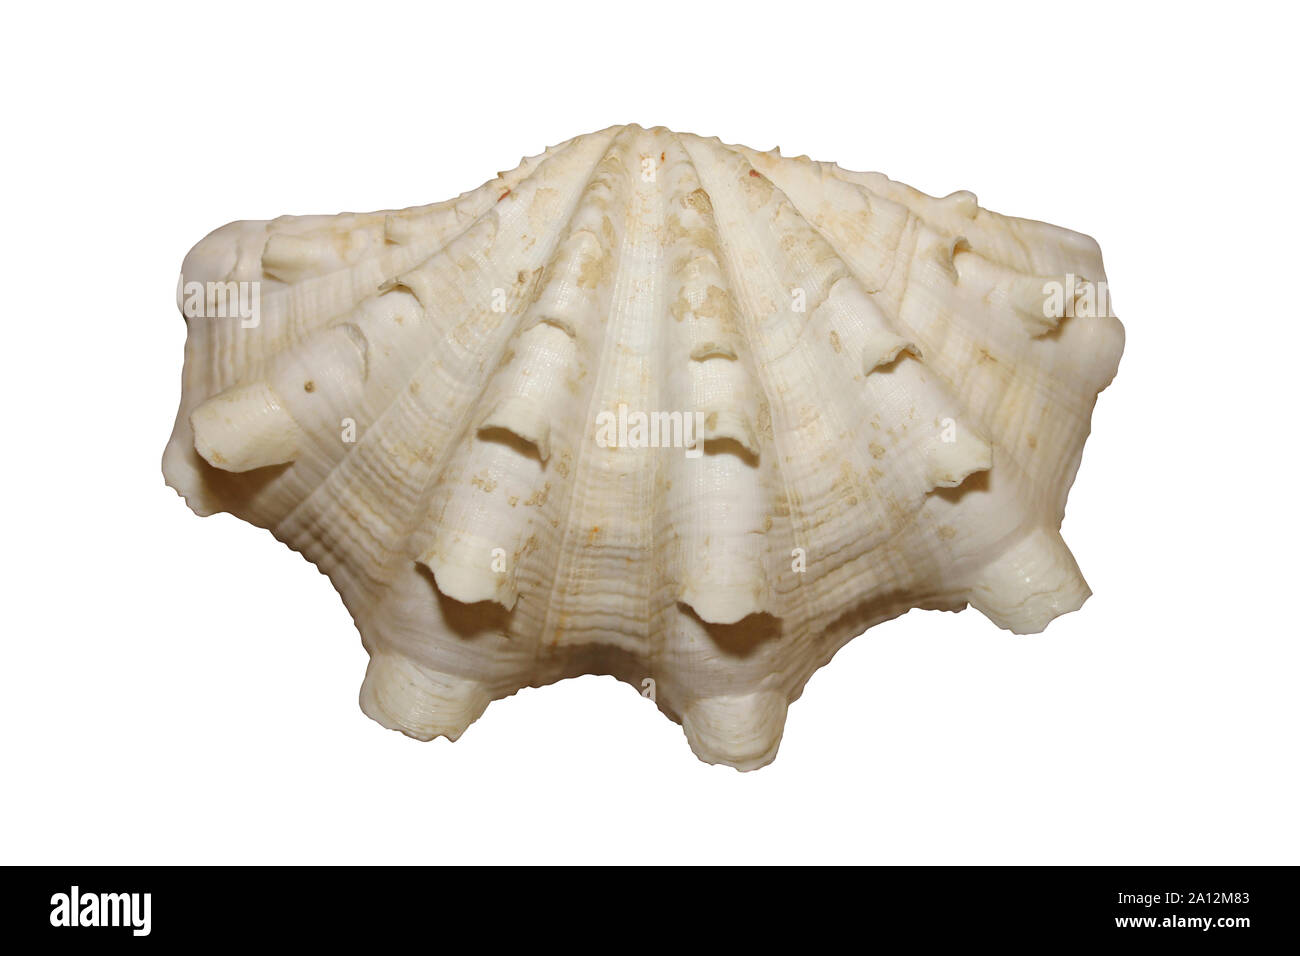 Giant Fluted Clam a.k.a. Scaly Clam Tridacna squamosa Stock Photo